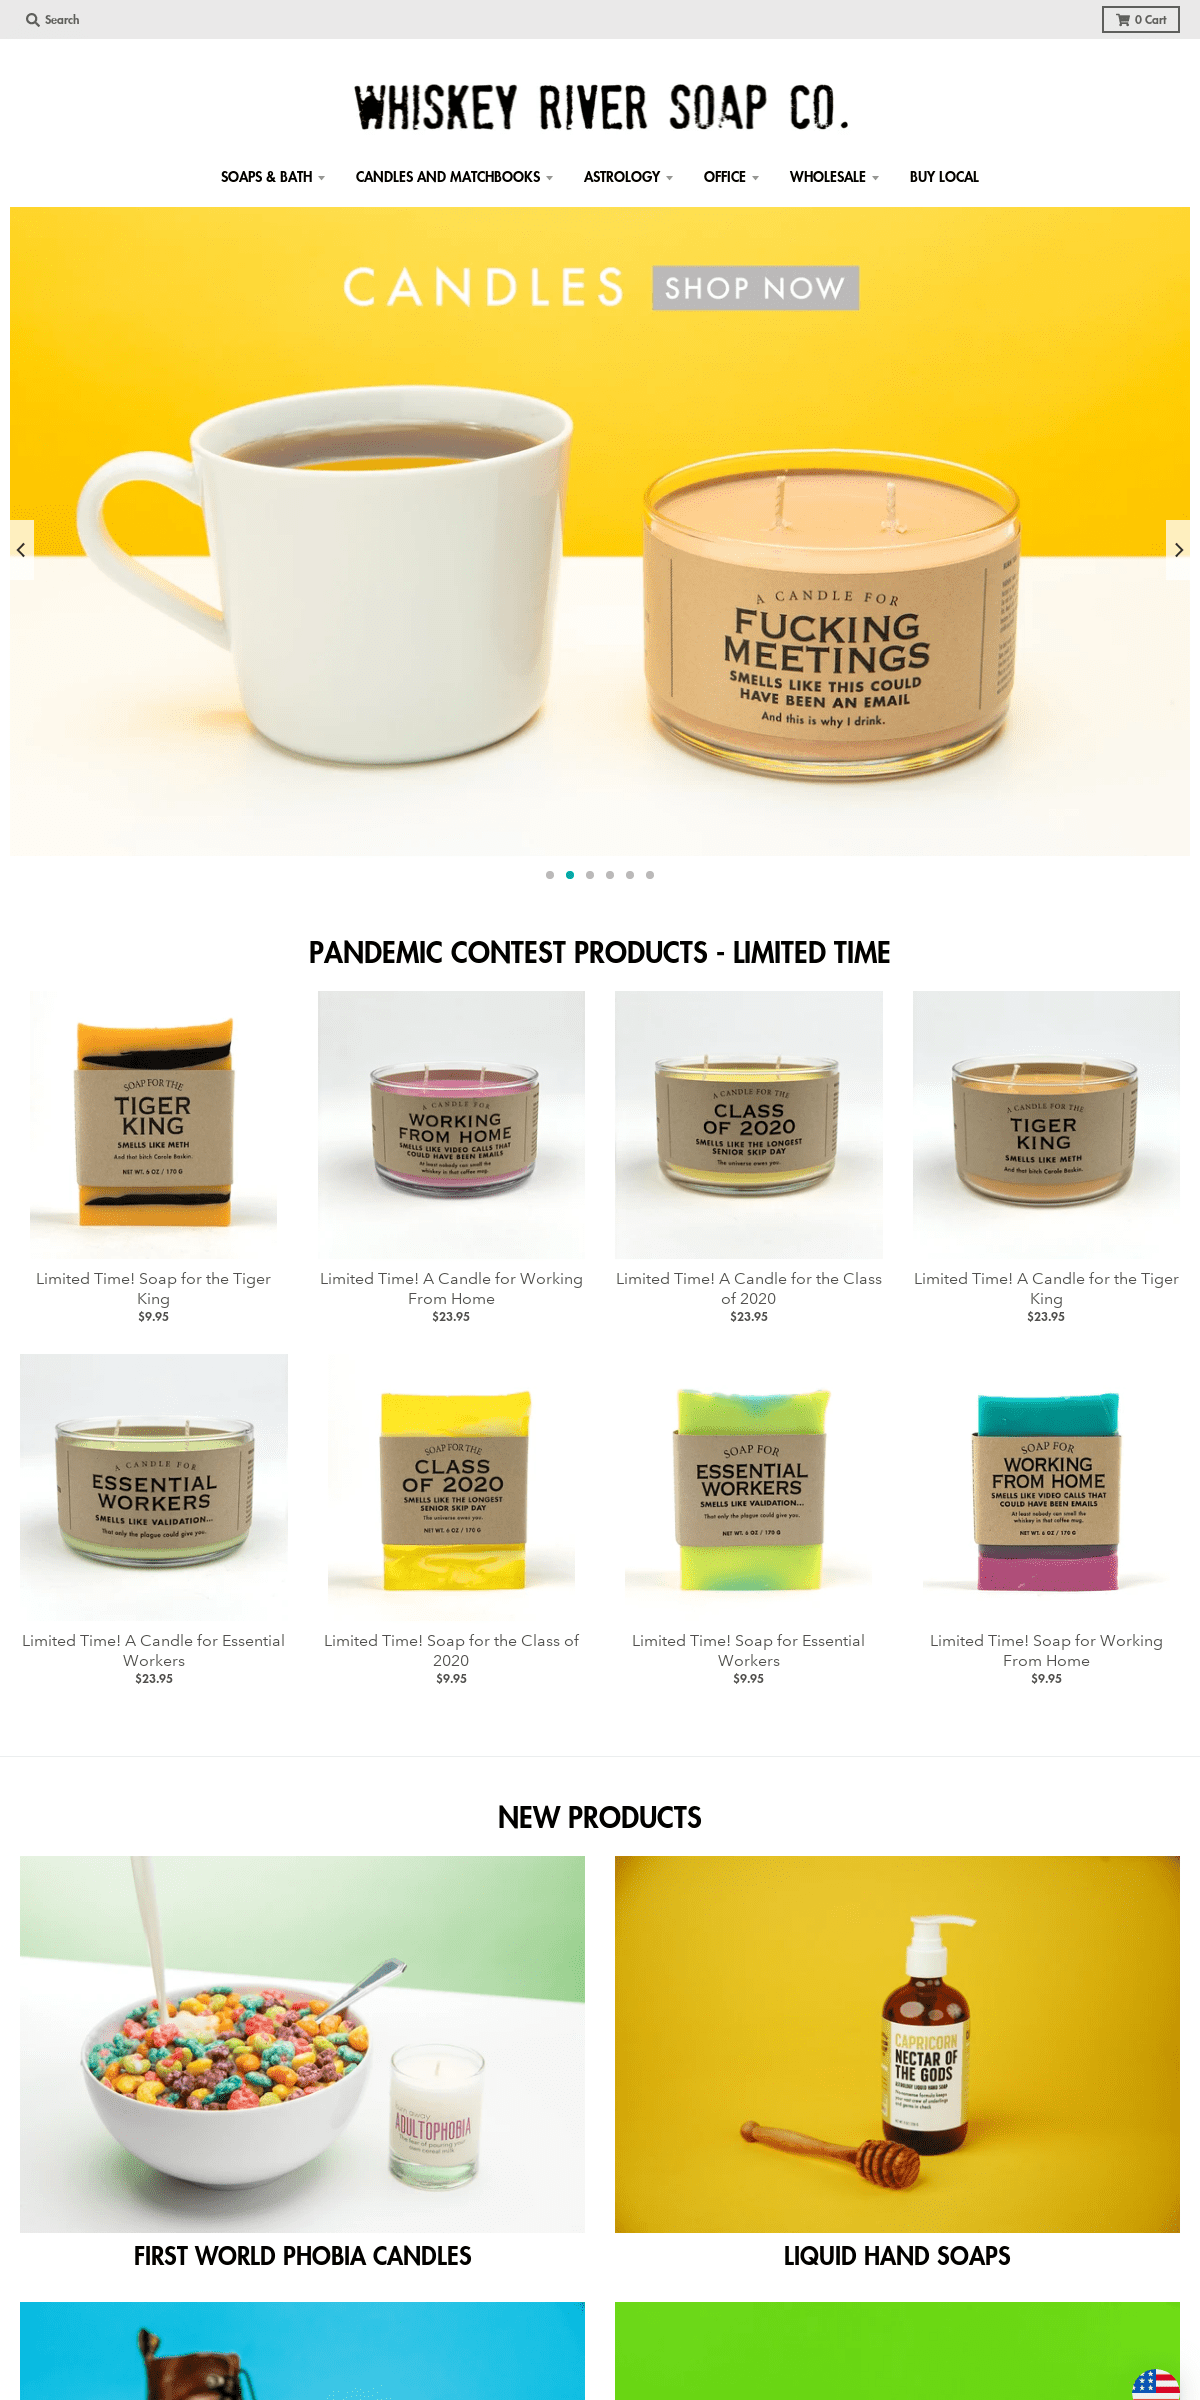 A complete backup of whiskeyriversoap.com